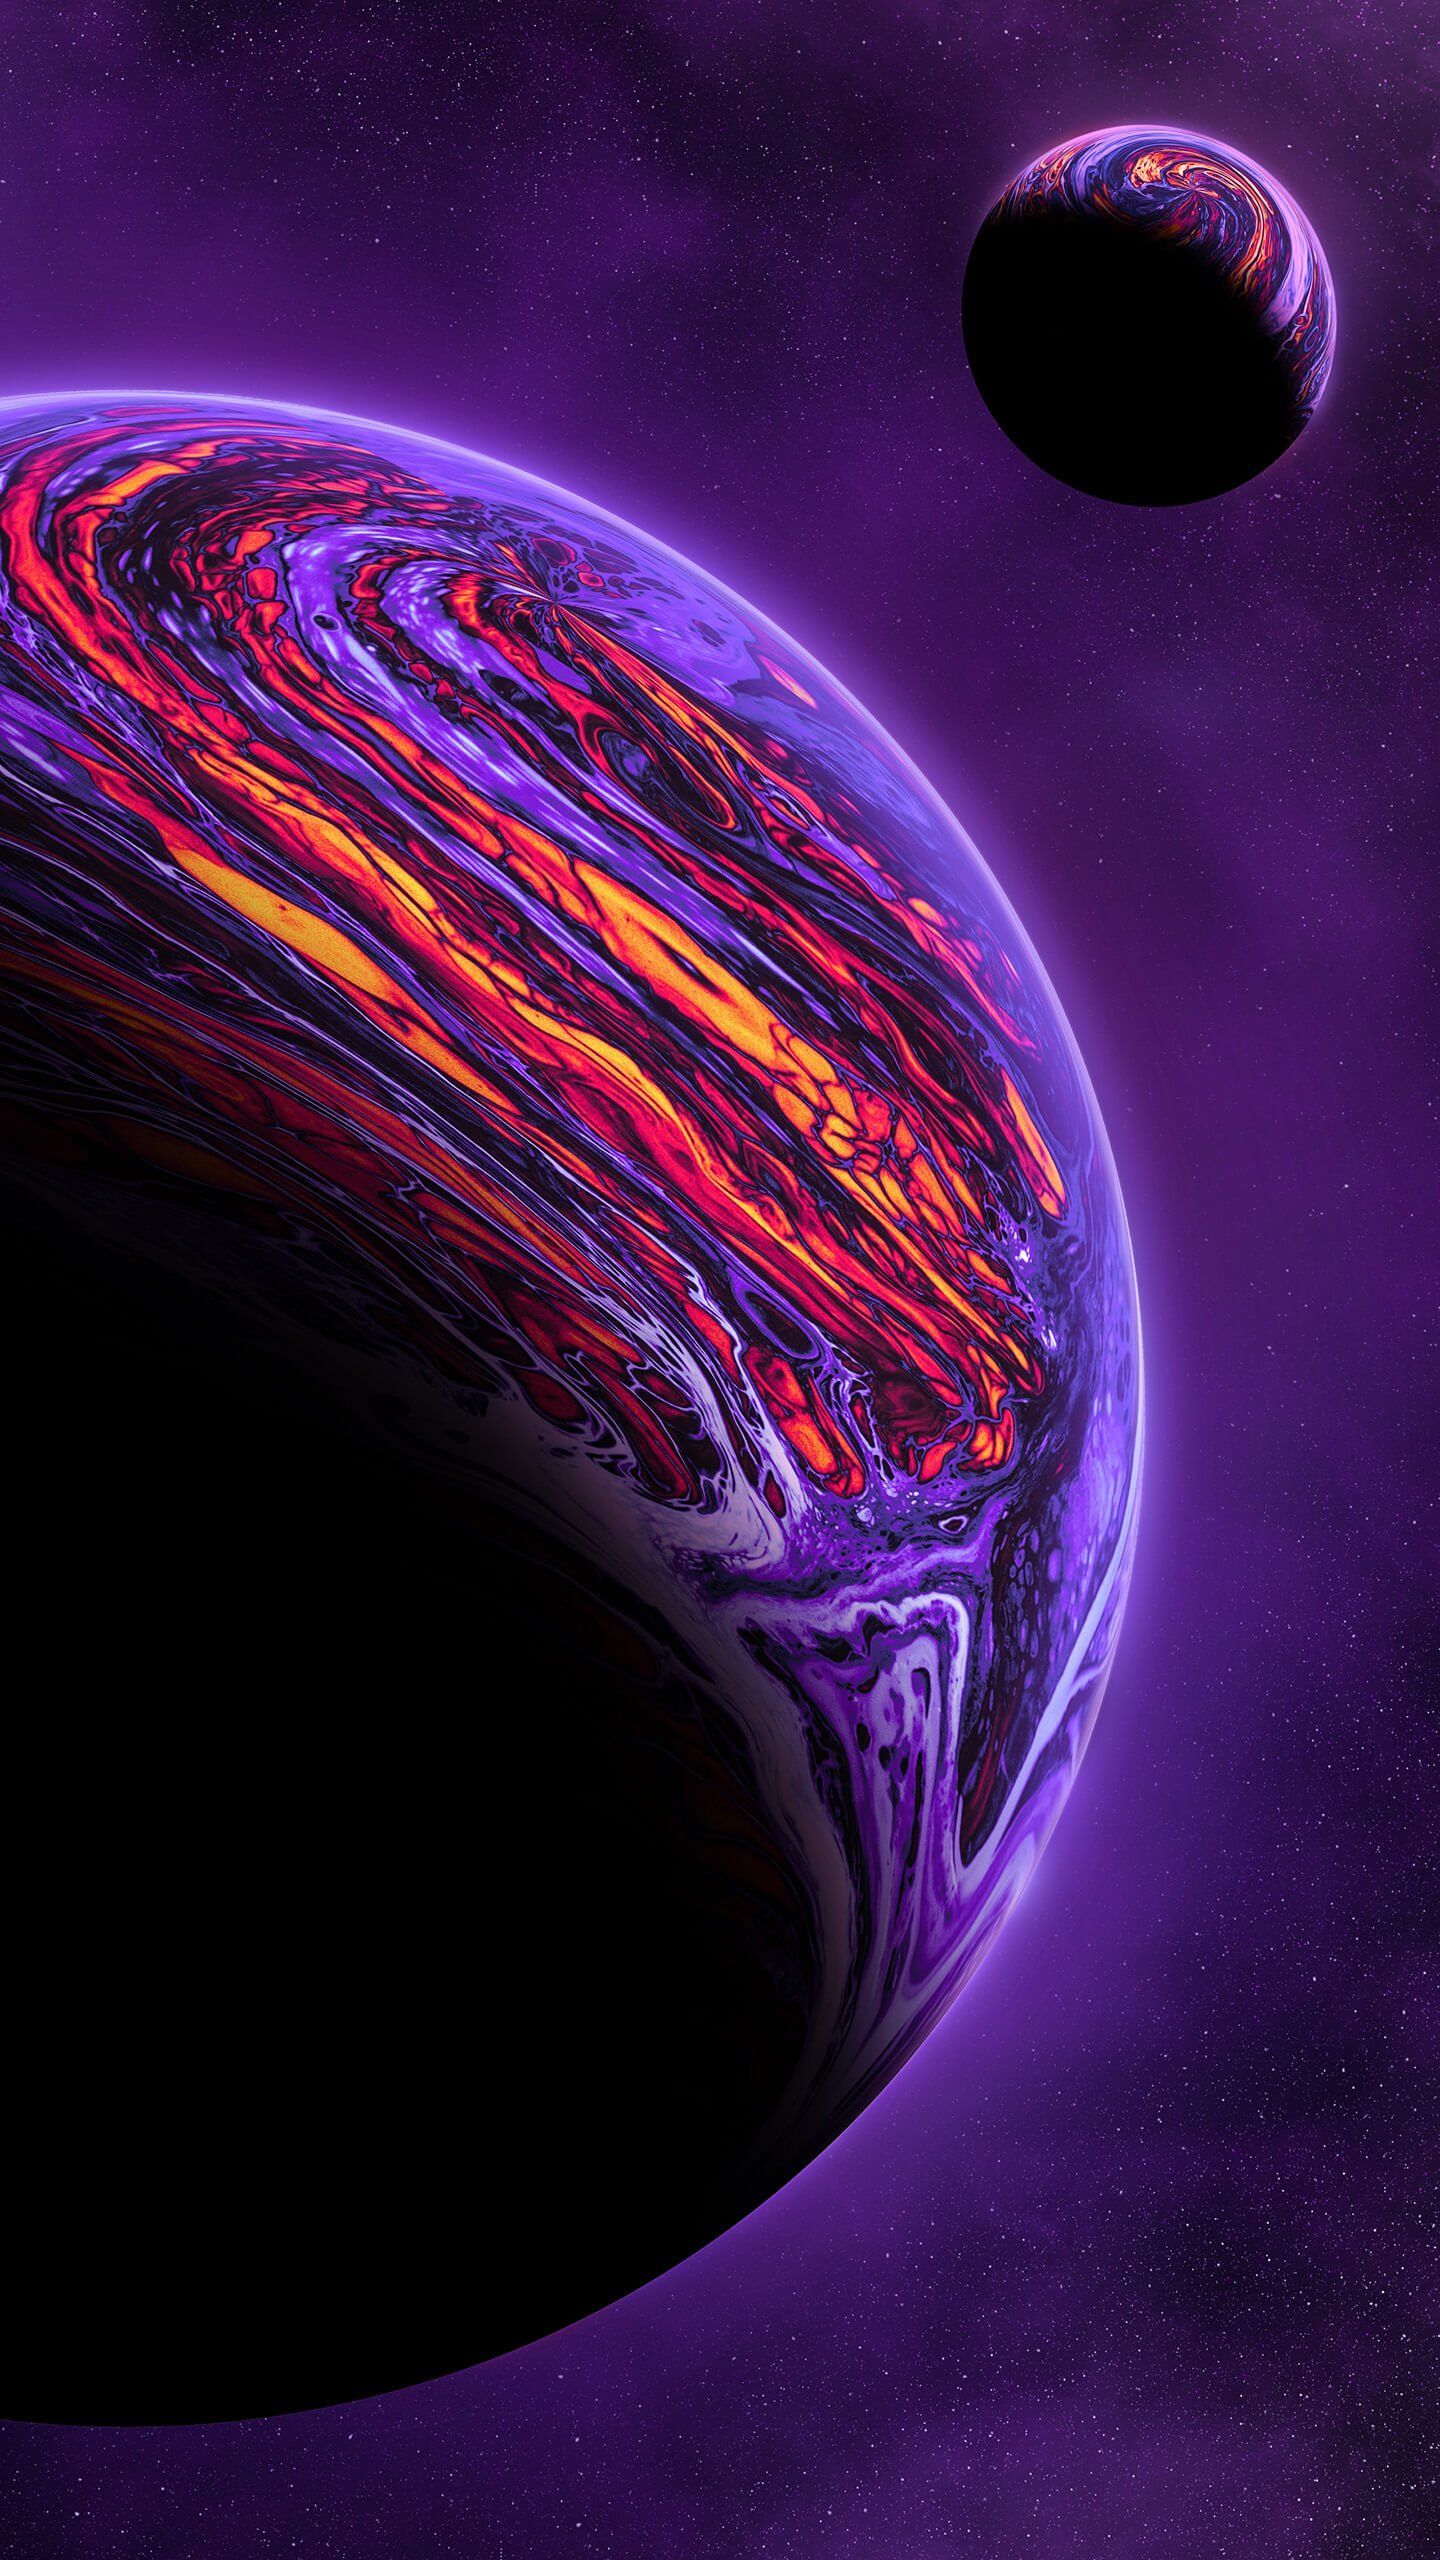 Credits to Geoglyser. Space iphone wallpaper, iPhone wallpaper, Original iphone wallpaper